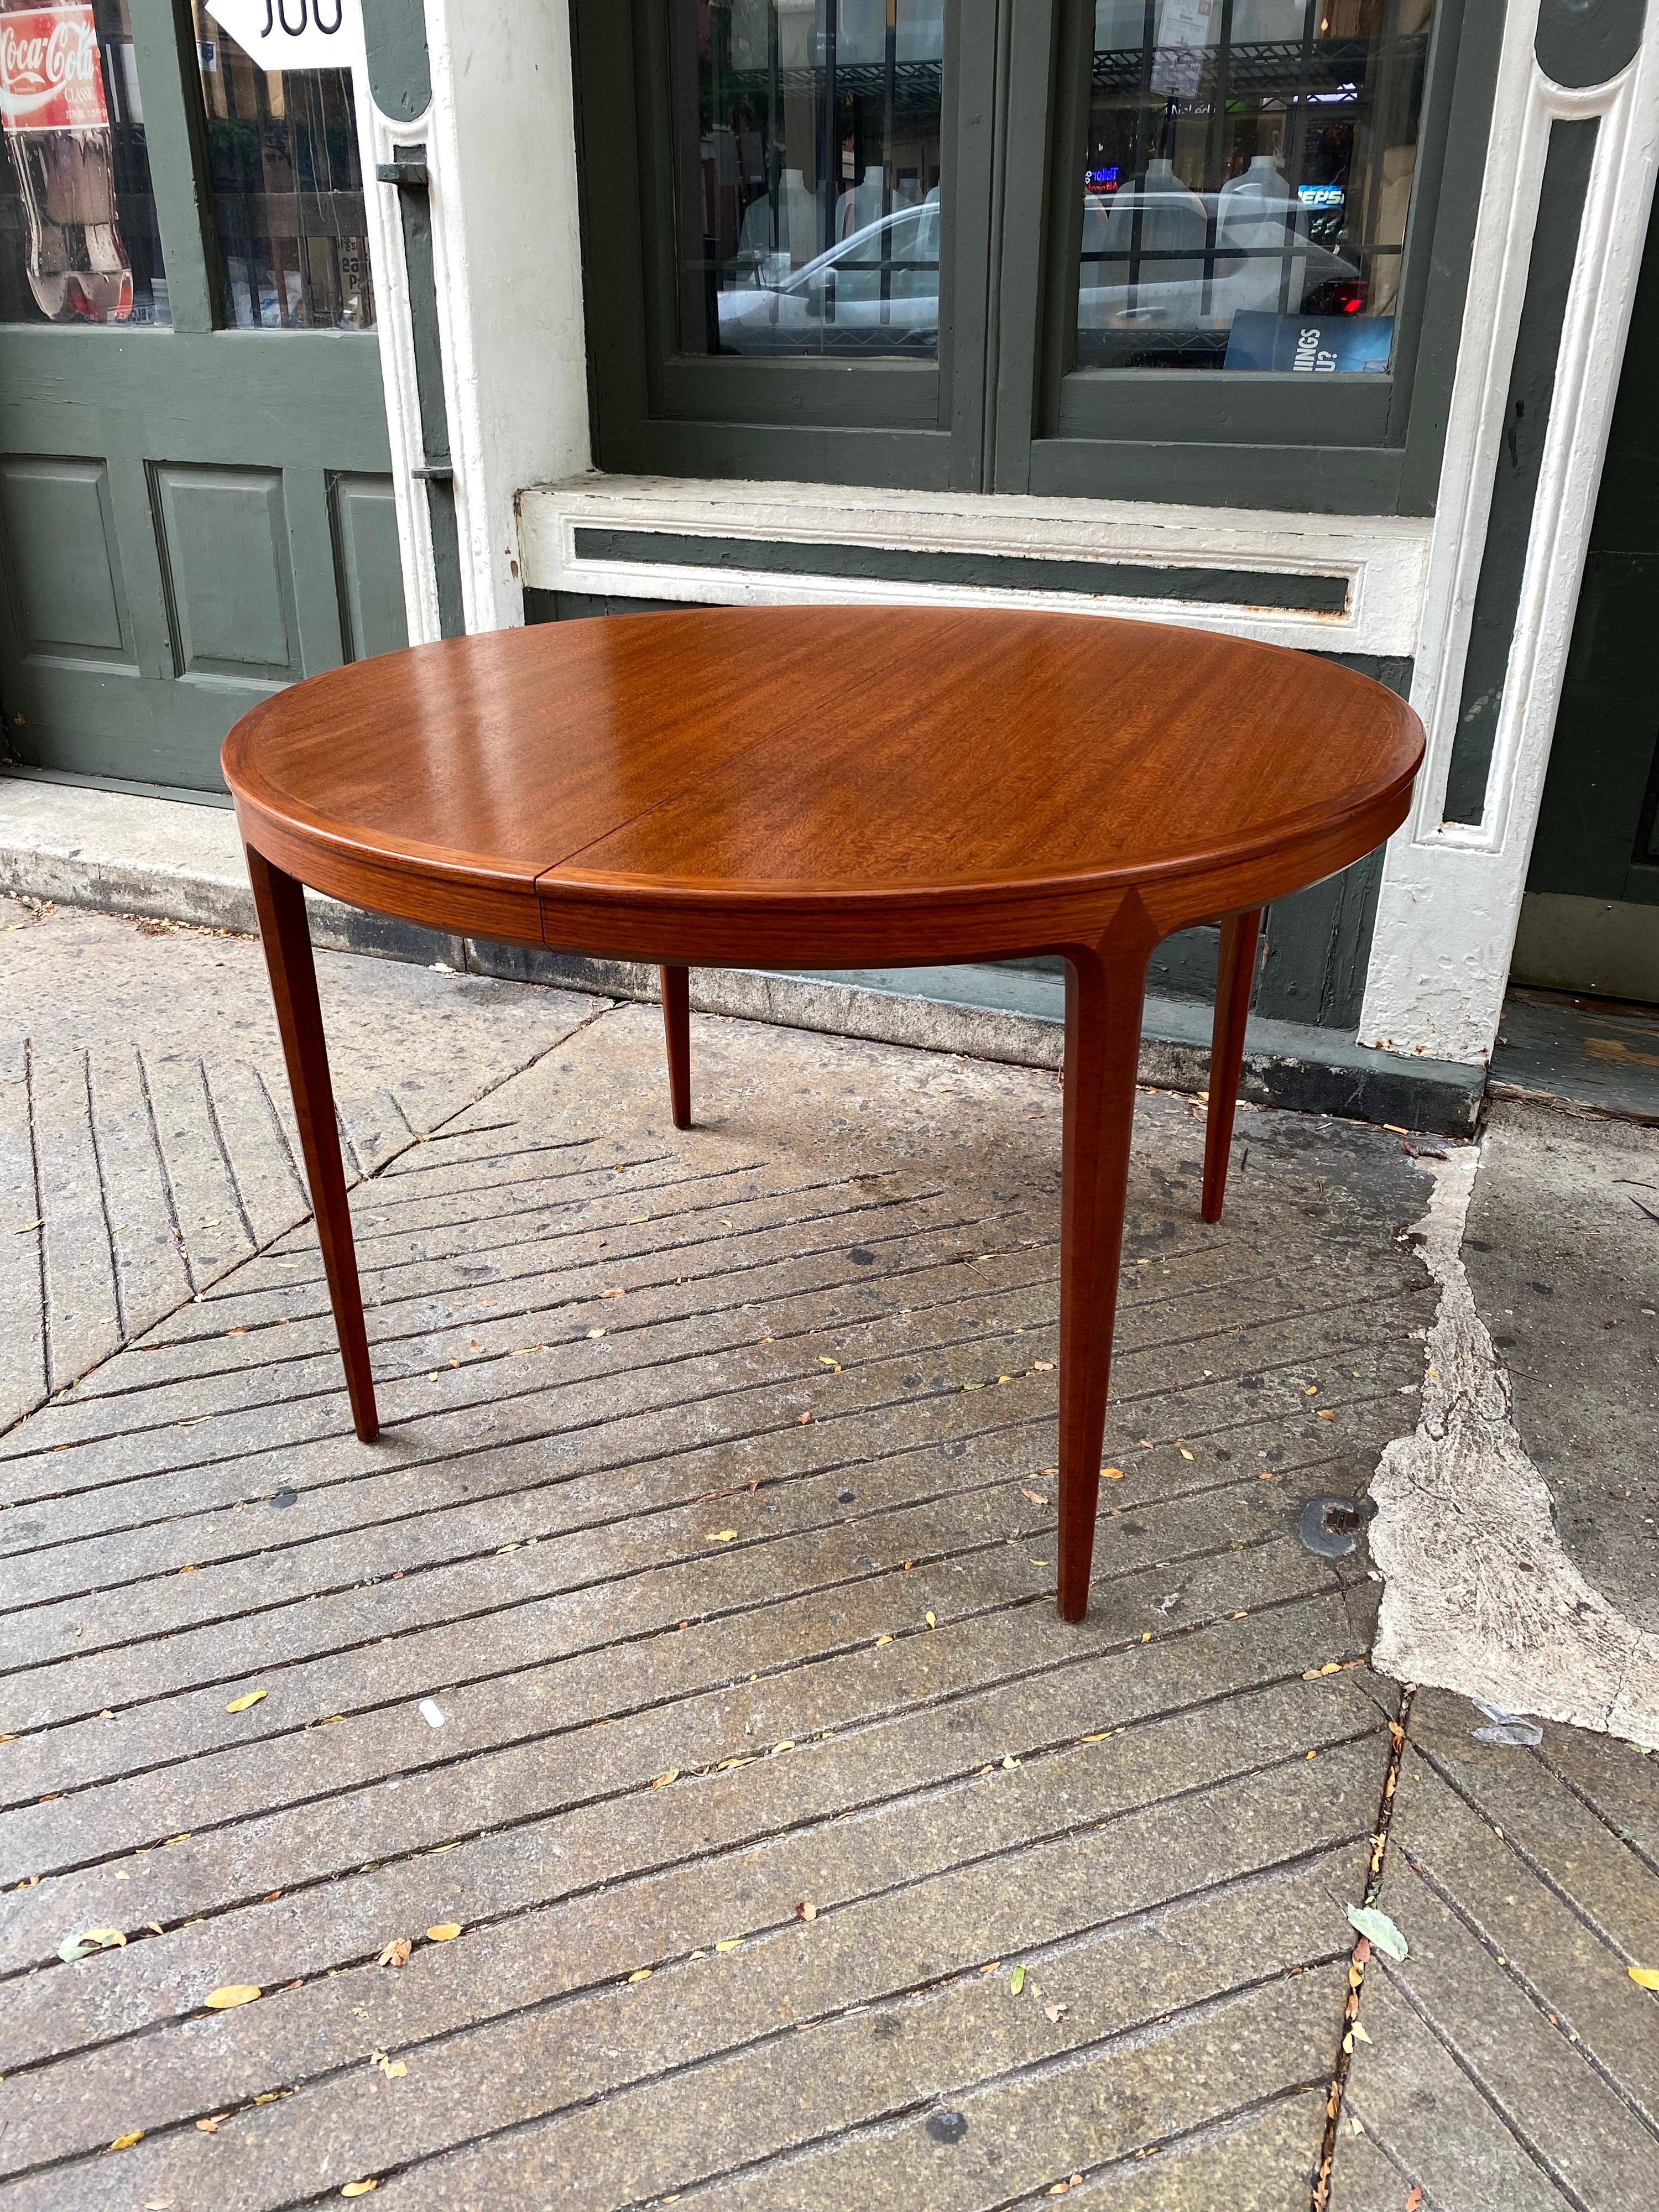 B. Fridhagen for Bodafors round teak dining table. One of the most beautifully made tables I have ever seen! The attention to detail is outstanding! Amazing beveled and angled legs tie in effortlessly to the skirt of the table. Two 21.5